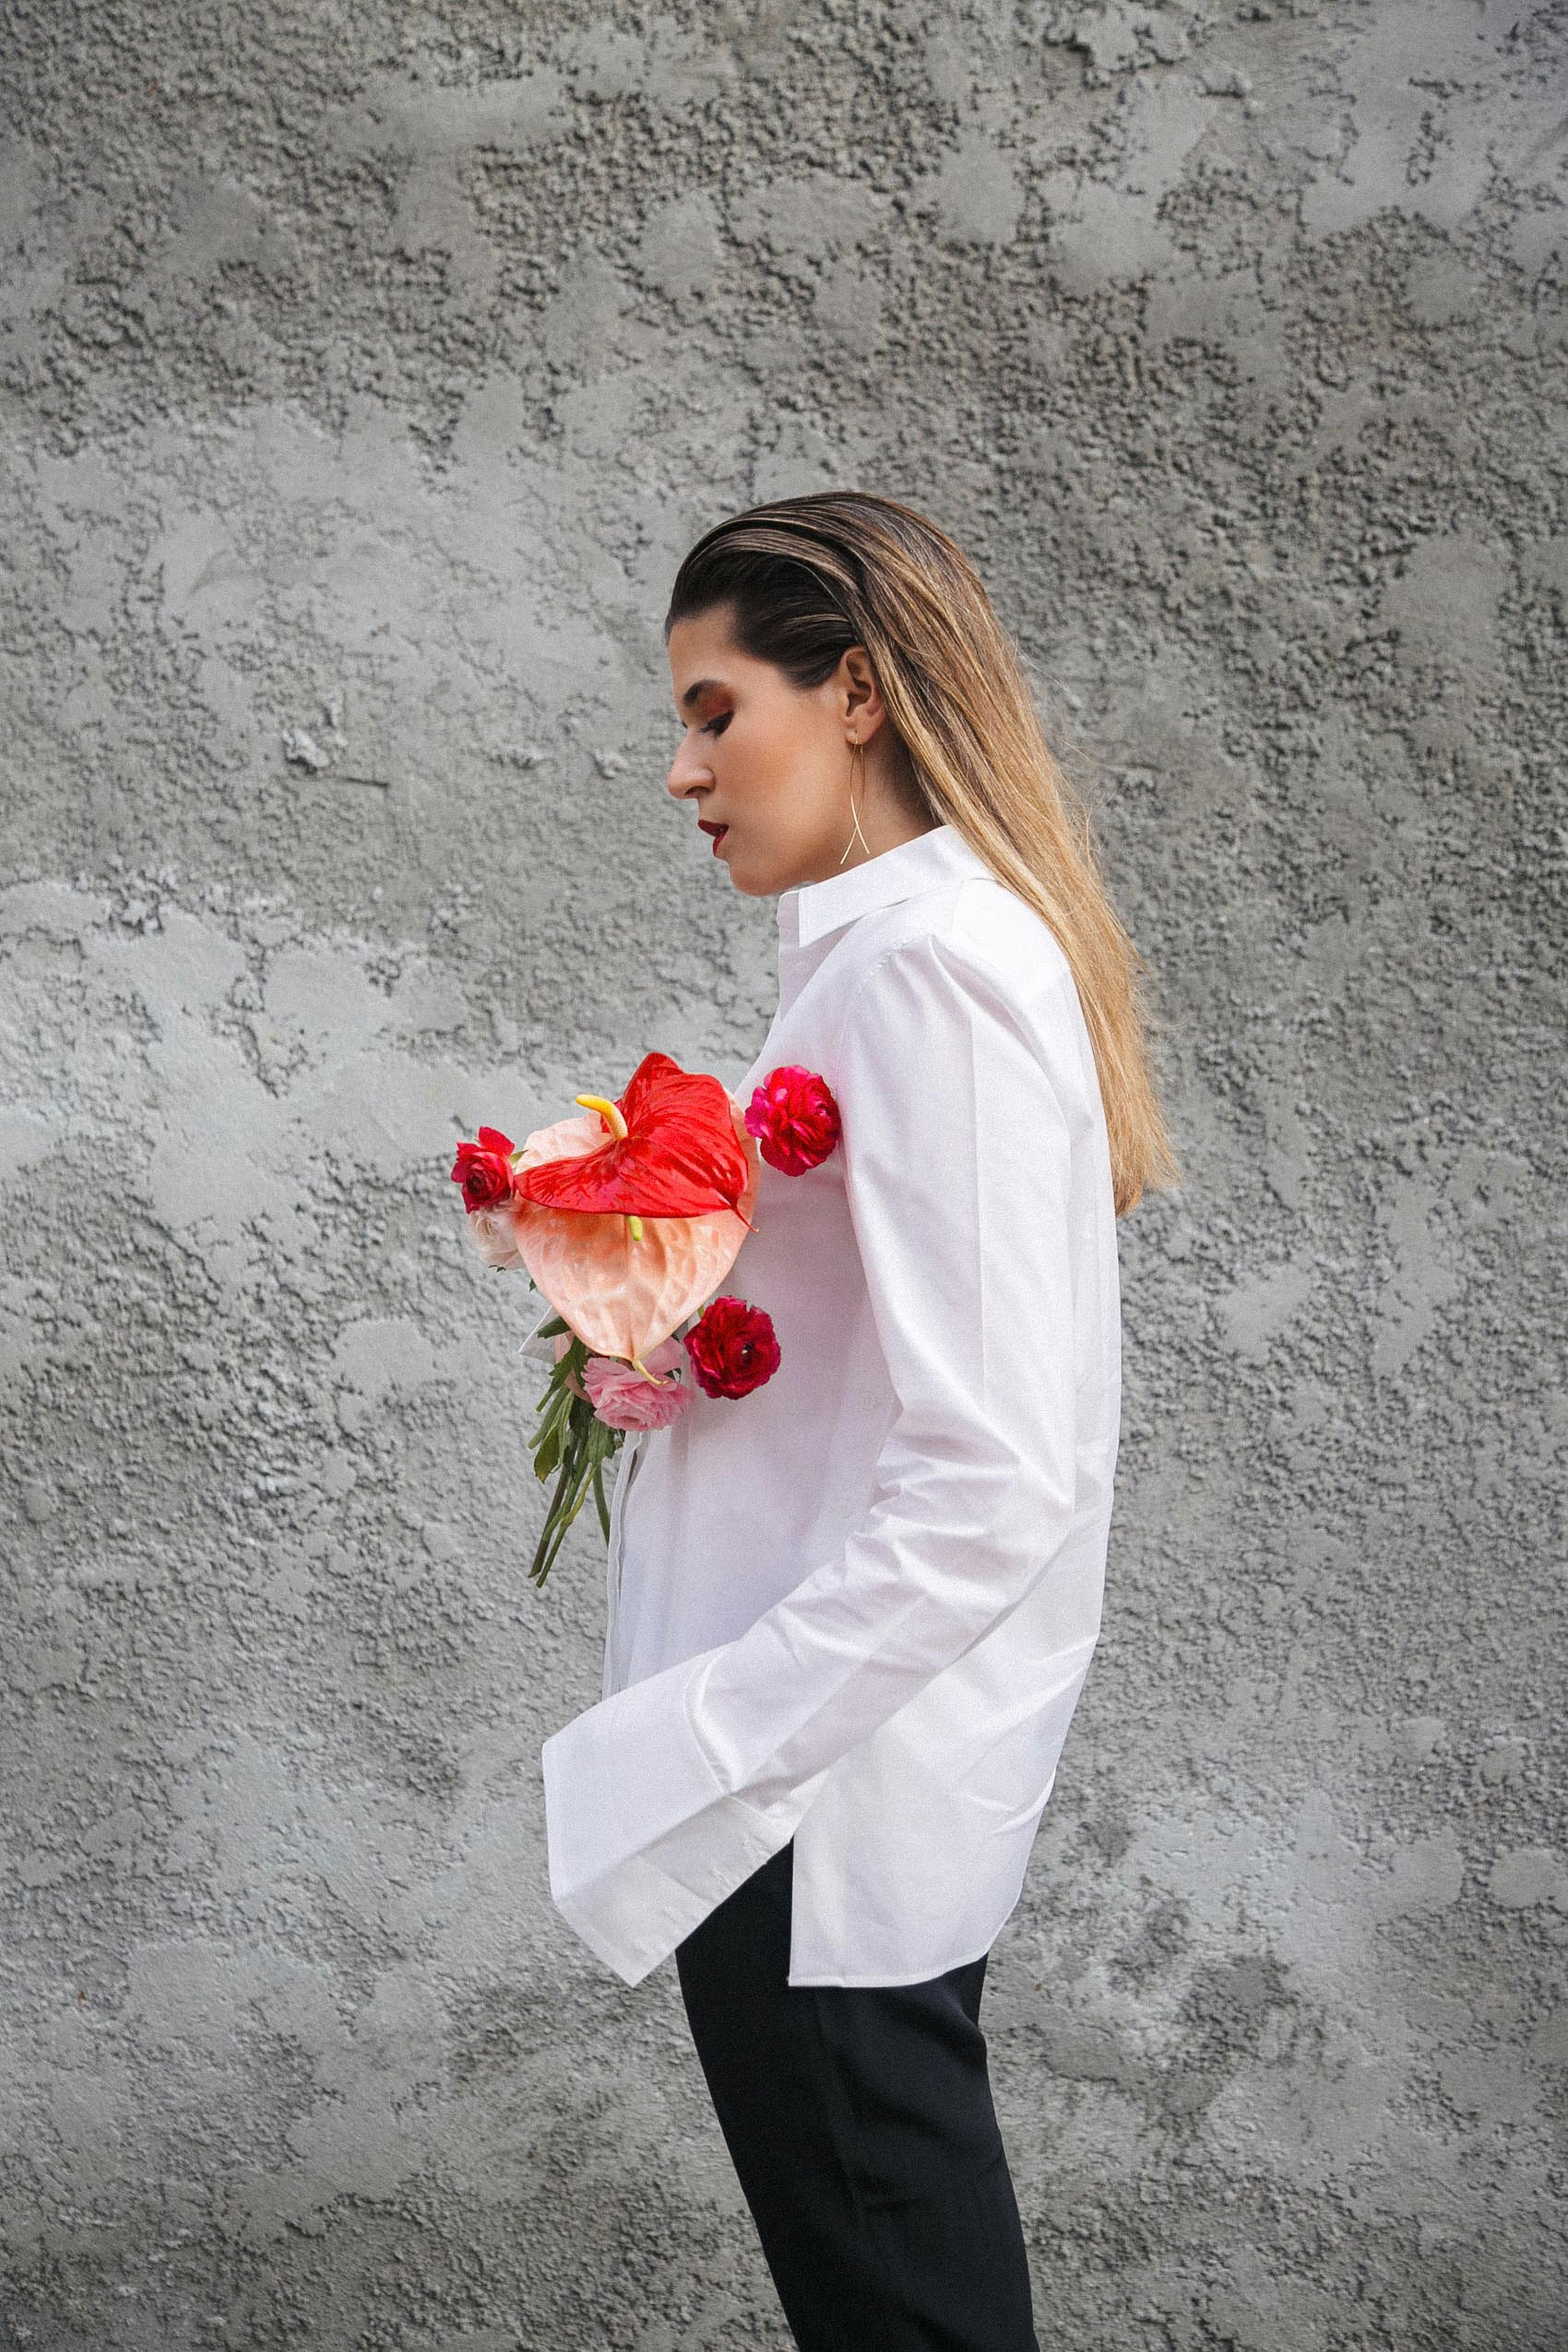 Chic white shirt and black pants outfit idea by blogger Maristella of A Constellation